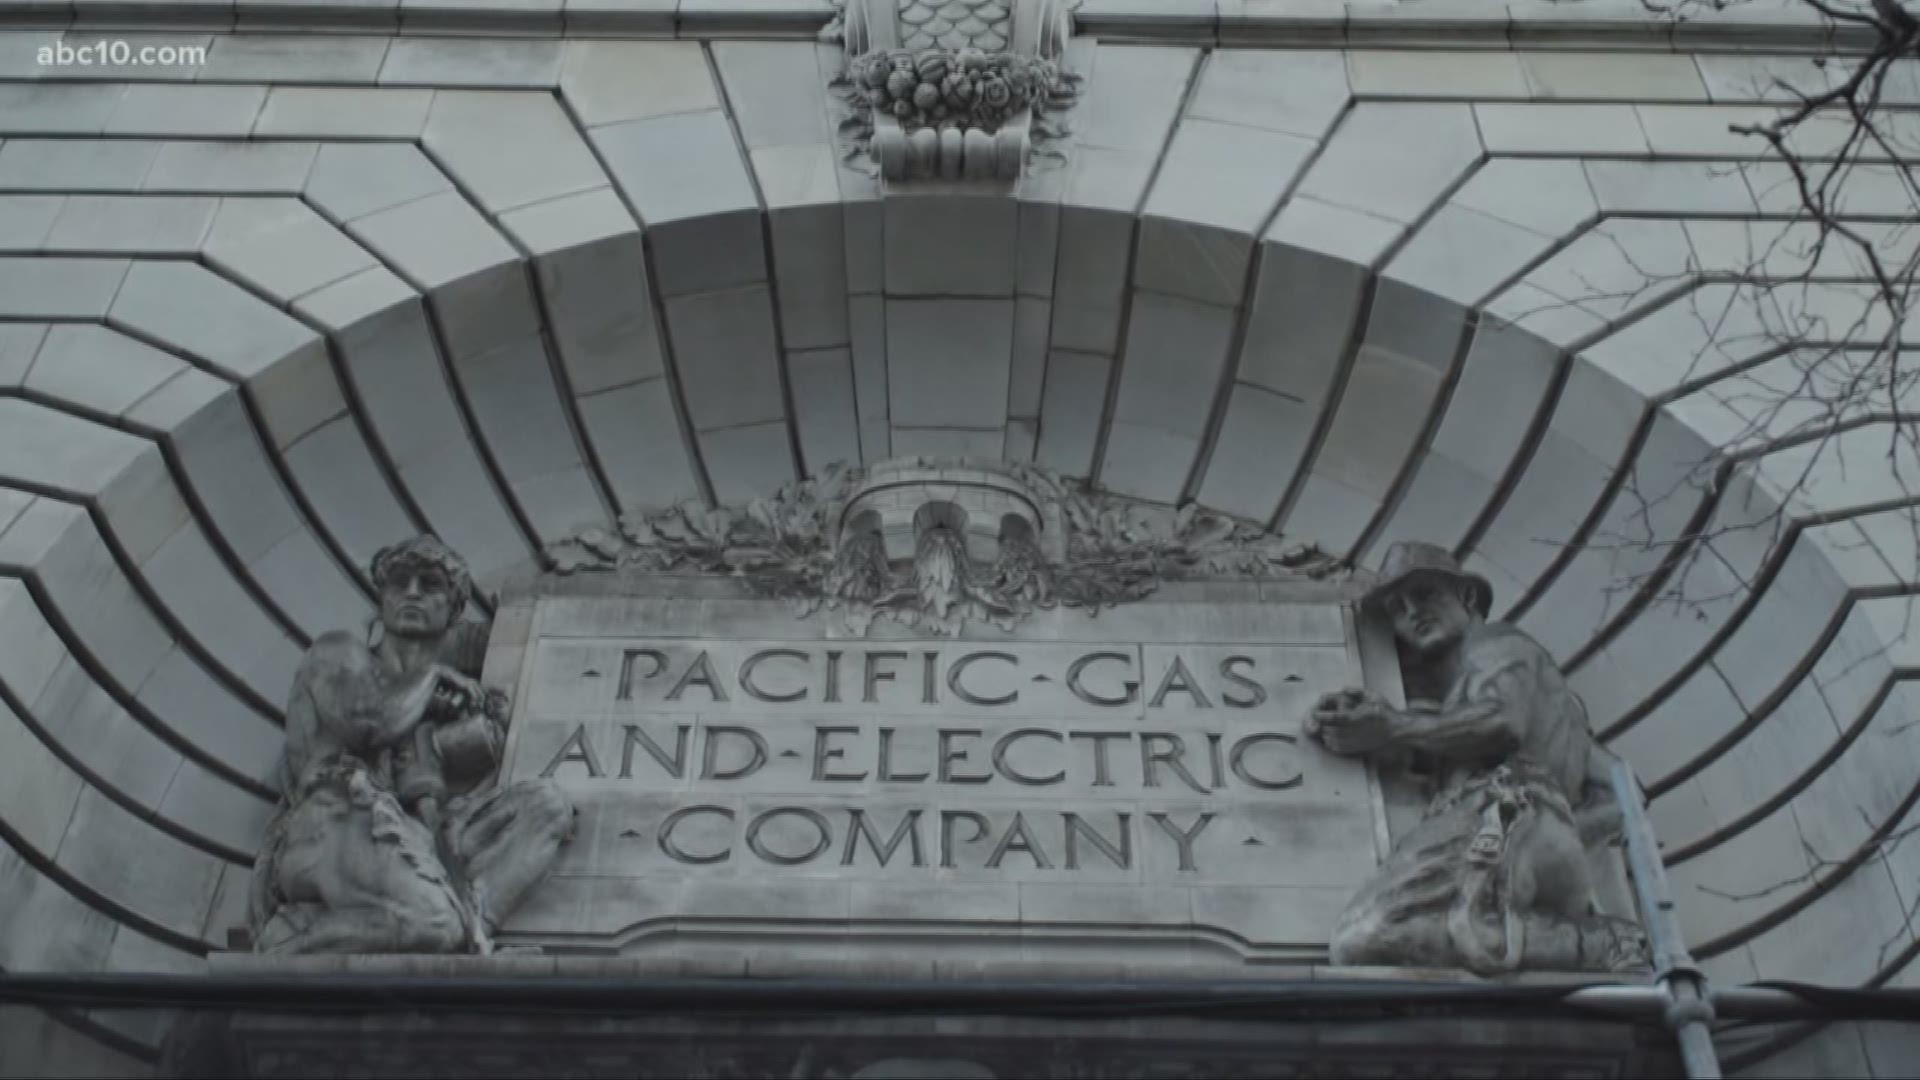 PG&E's fine for falsifying safety records over the course of several years was increased Friday from $65 million to $110 million.